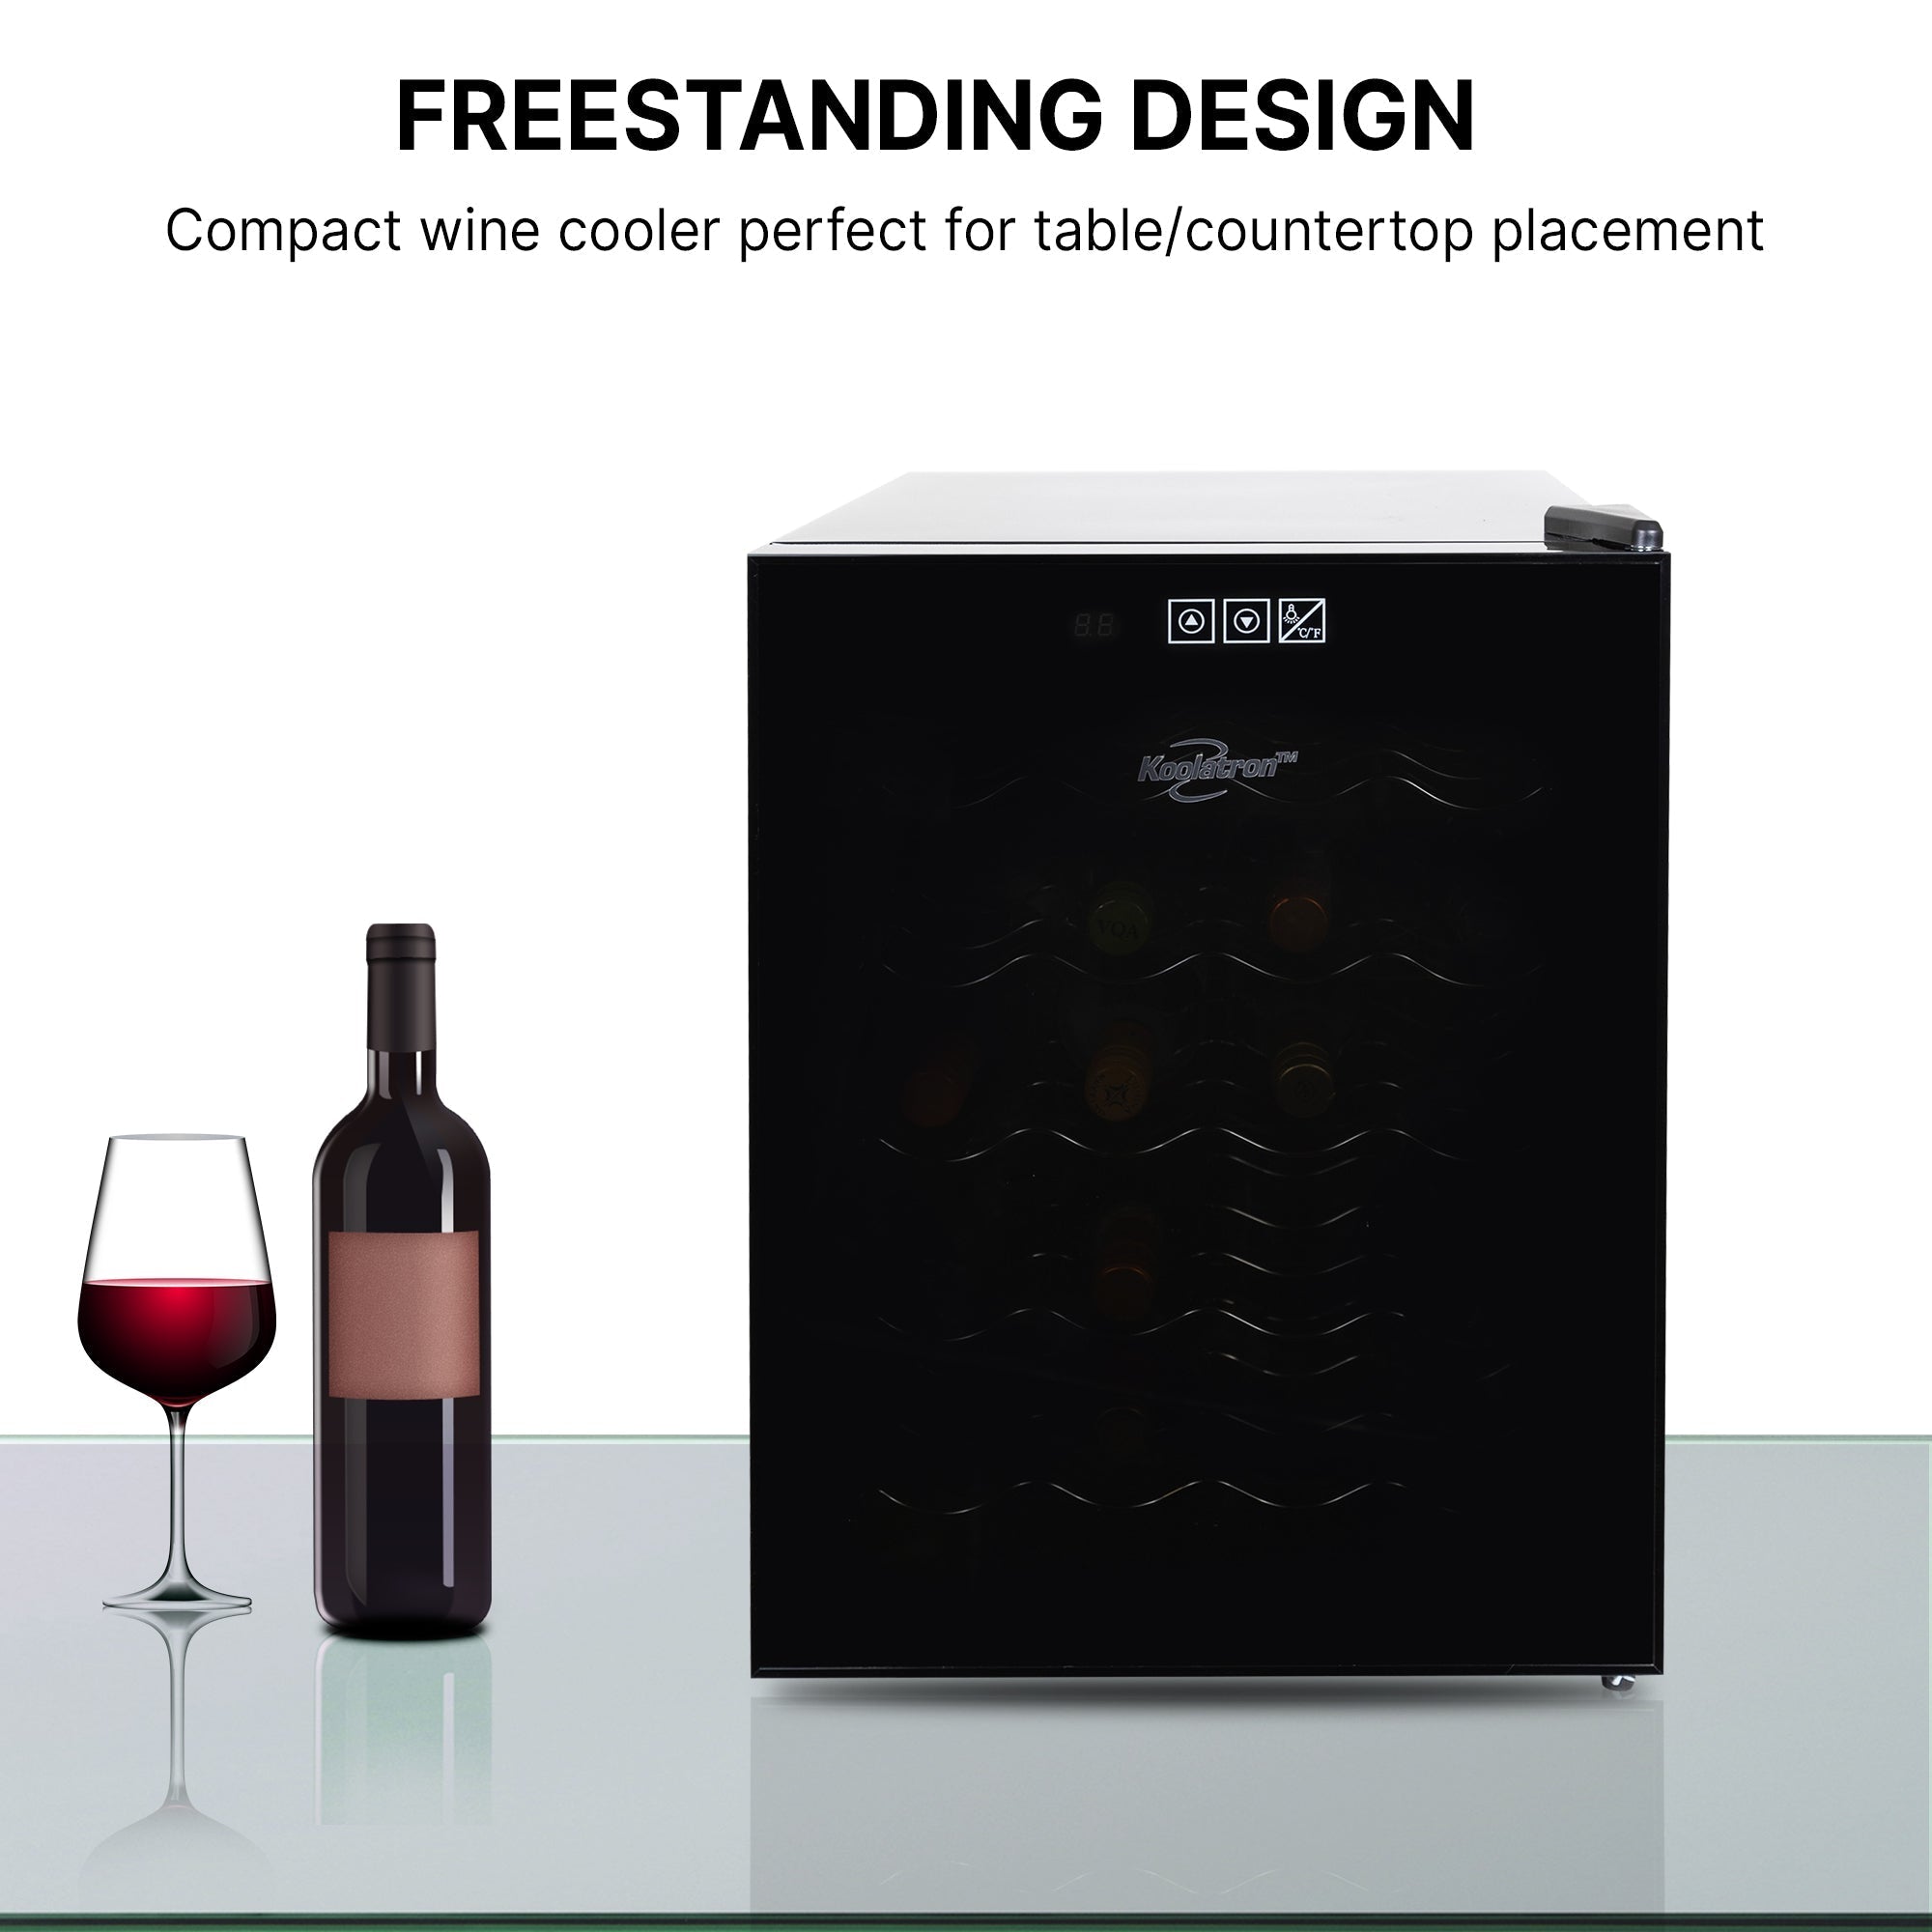 Koolatron 20 bottle wine cooler, open, with a bottle and glass of red wine to the left; Text above reads "Freestanding design: Compact wine cooler perfect for floor or countertop placement"